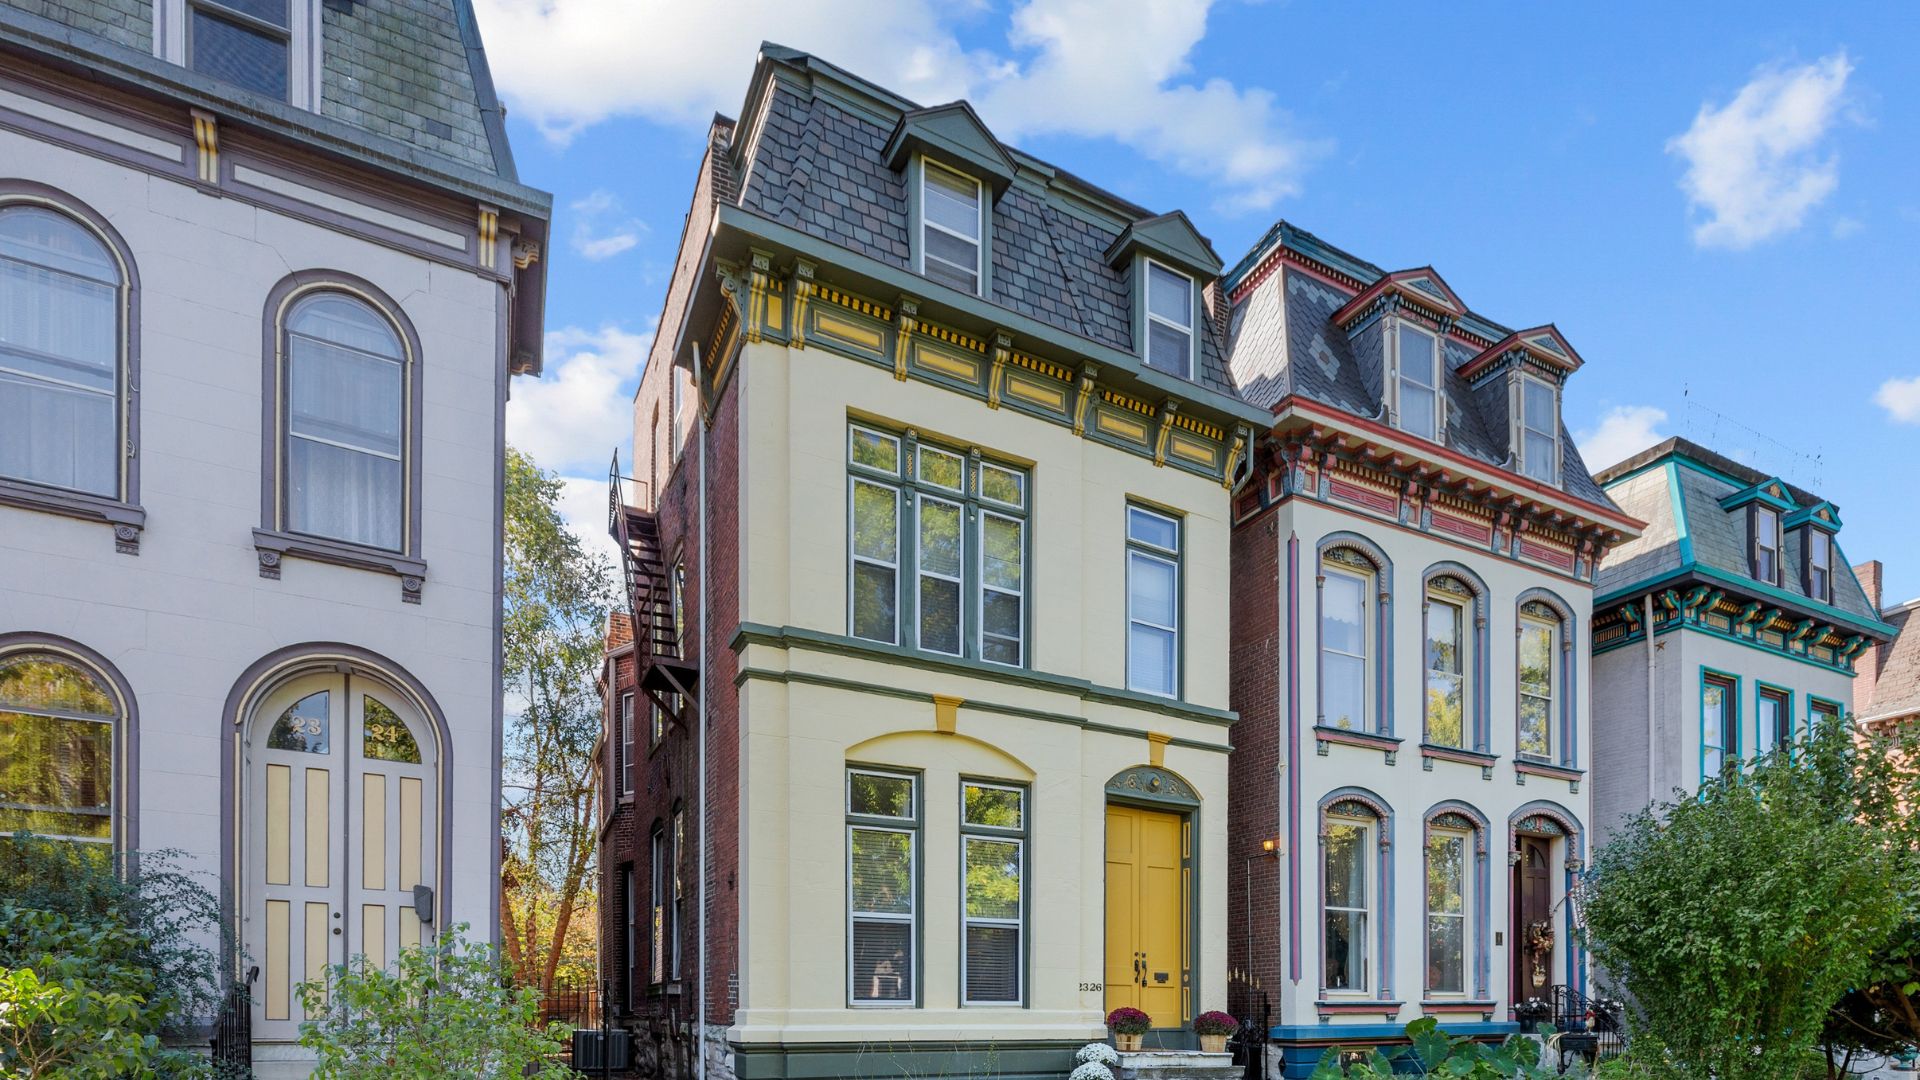 The “Painted Ladies” in Lafayette Square are meticulously restored 150-year-old Victorian mansions.